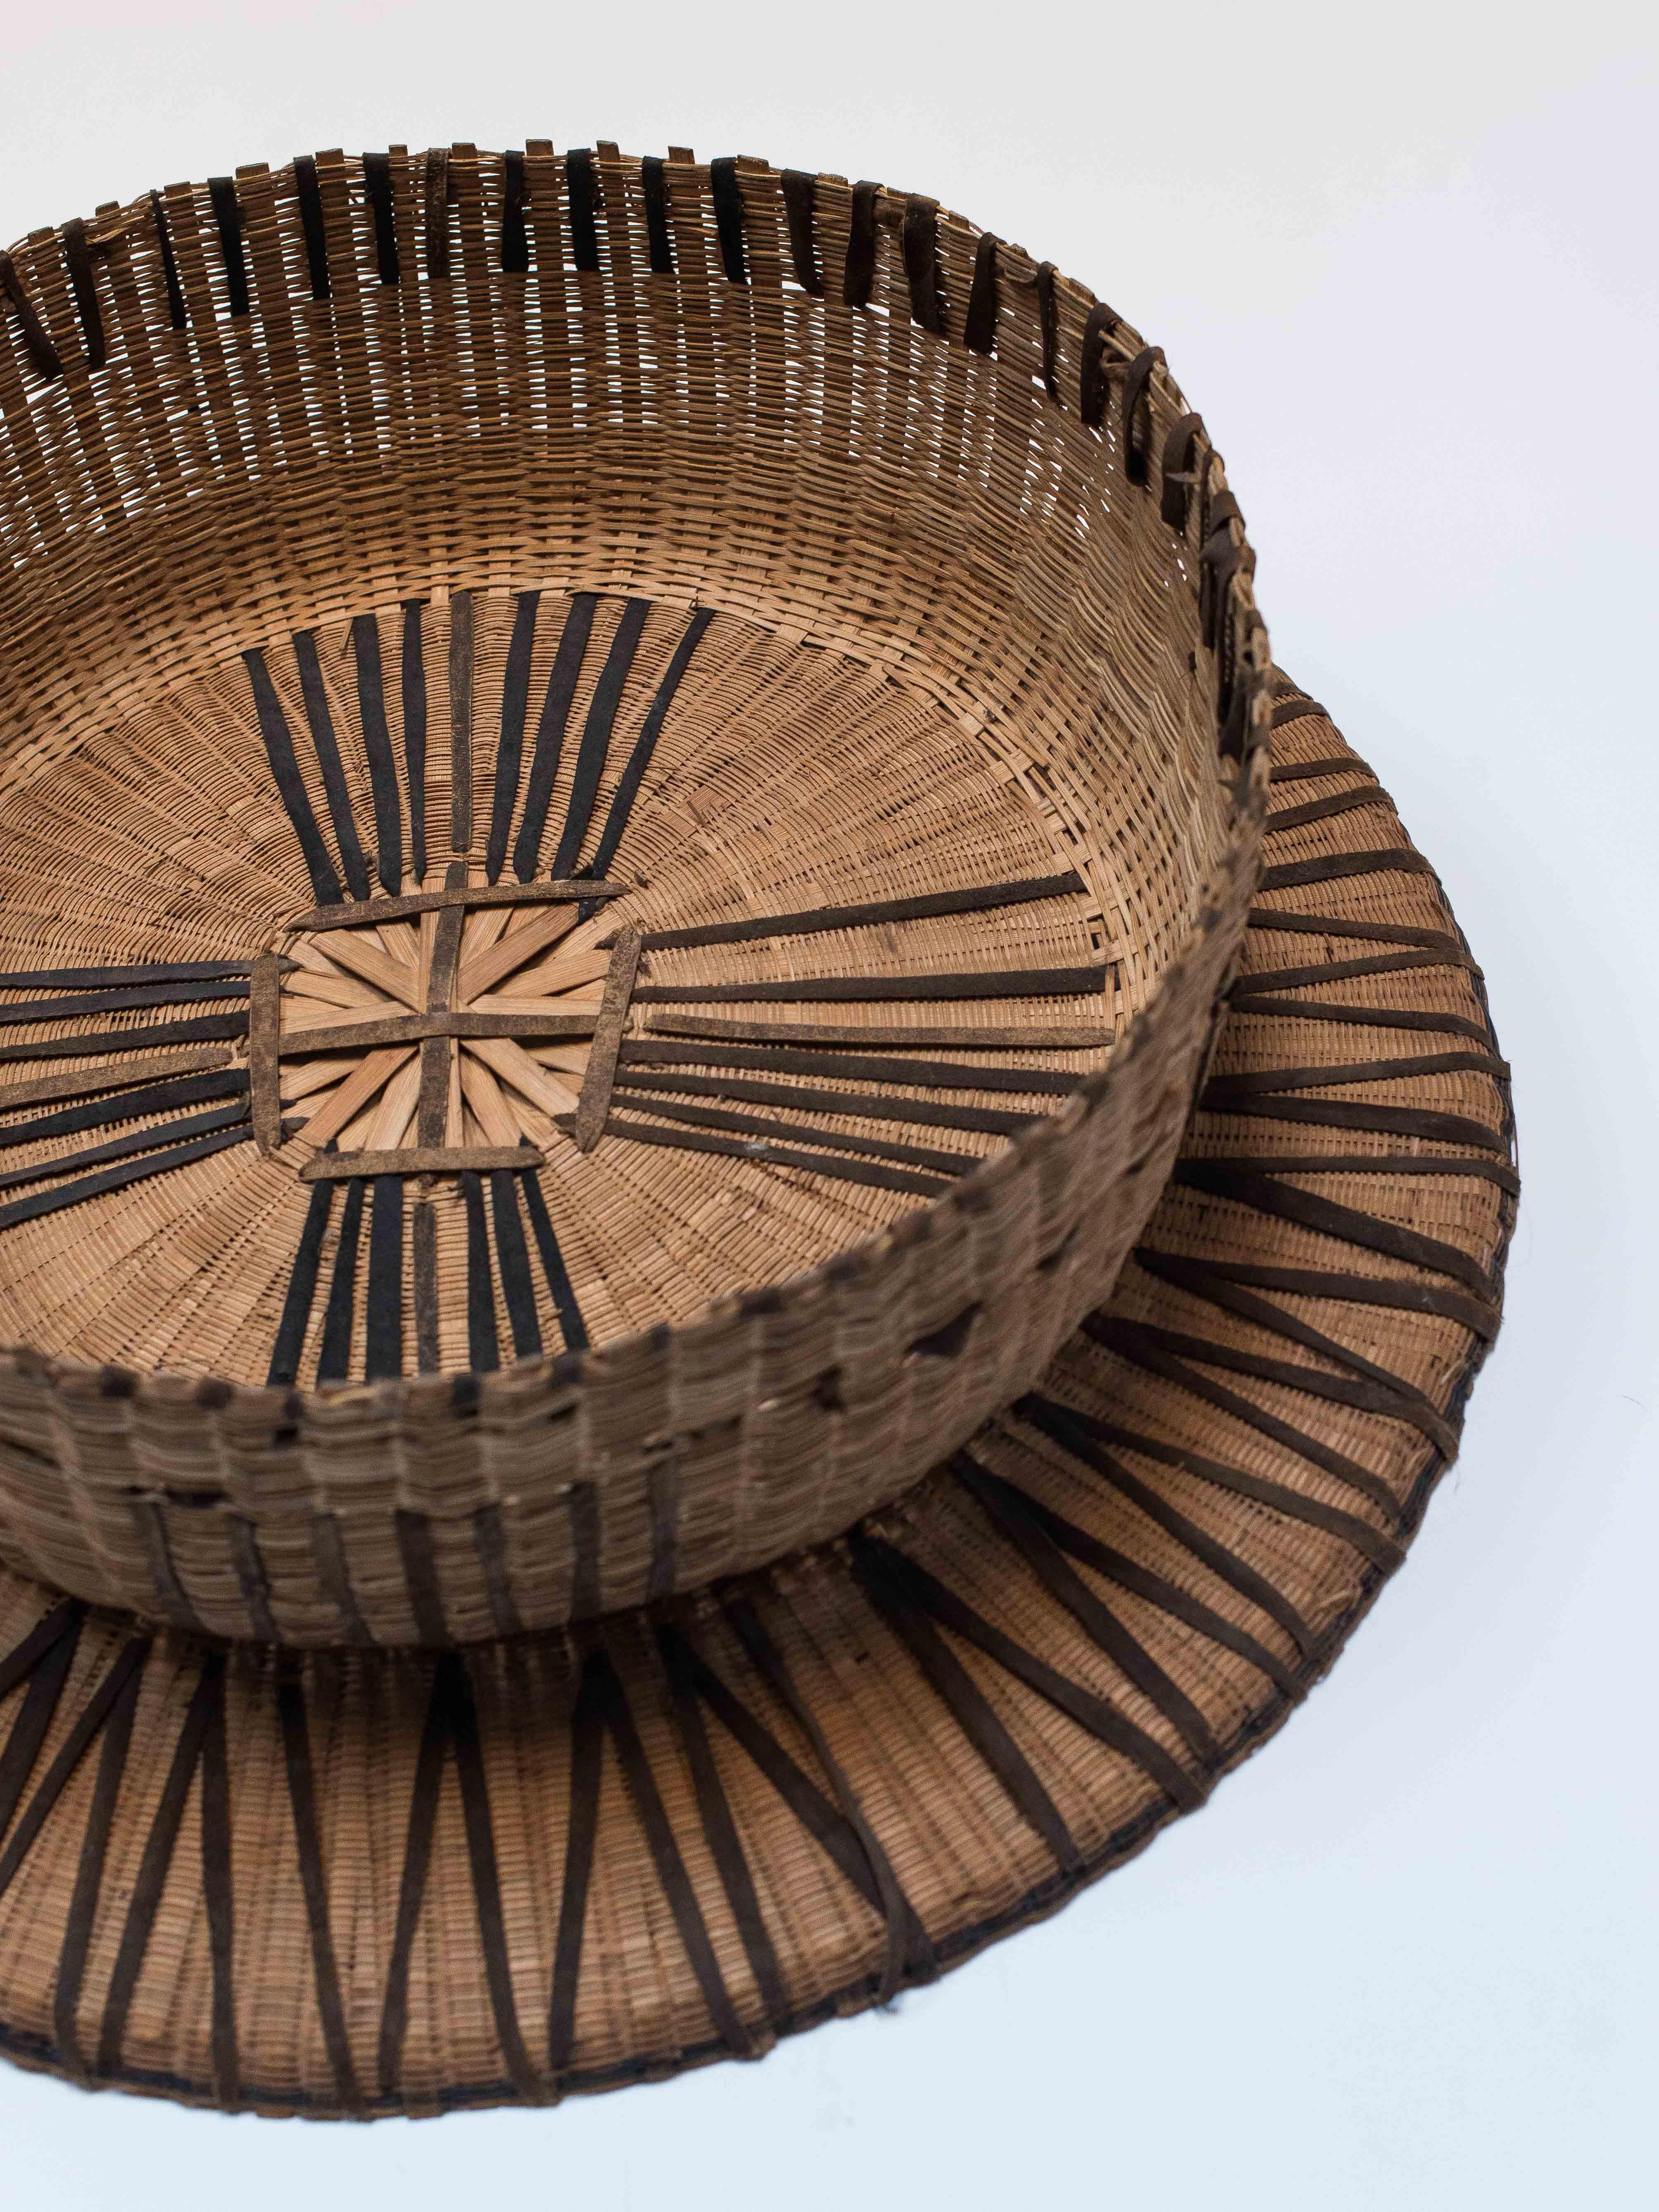 Very Large Wall Basket, Straw and Leather, African Folk Art 1970 For Sale 2